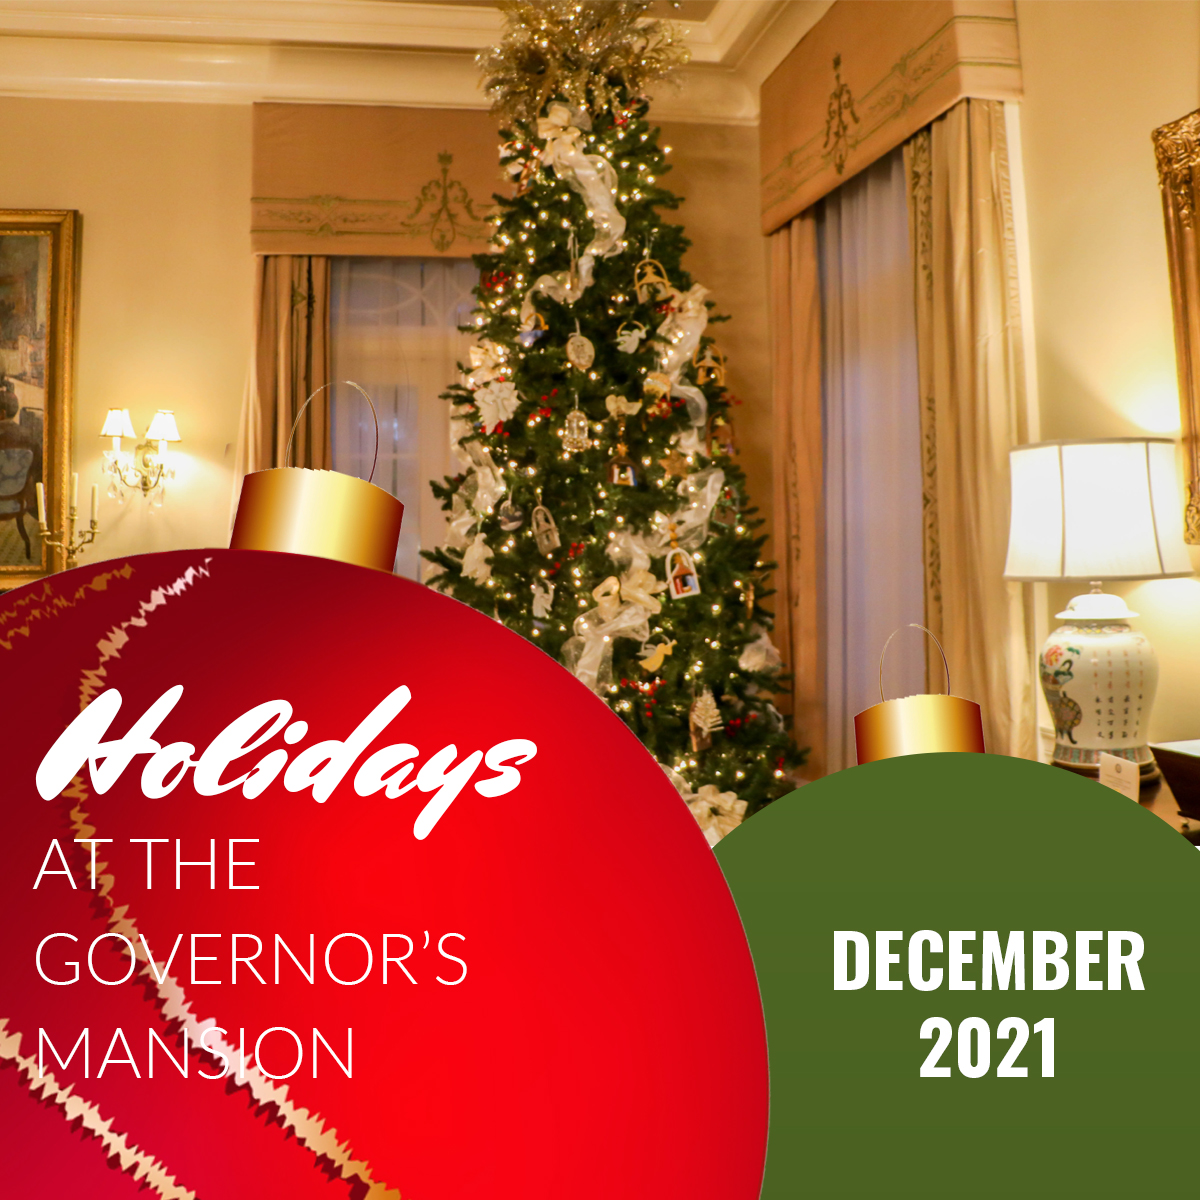 The Governor’s Mansion: Holidays at the Governor’s Mansion